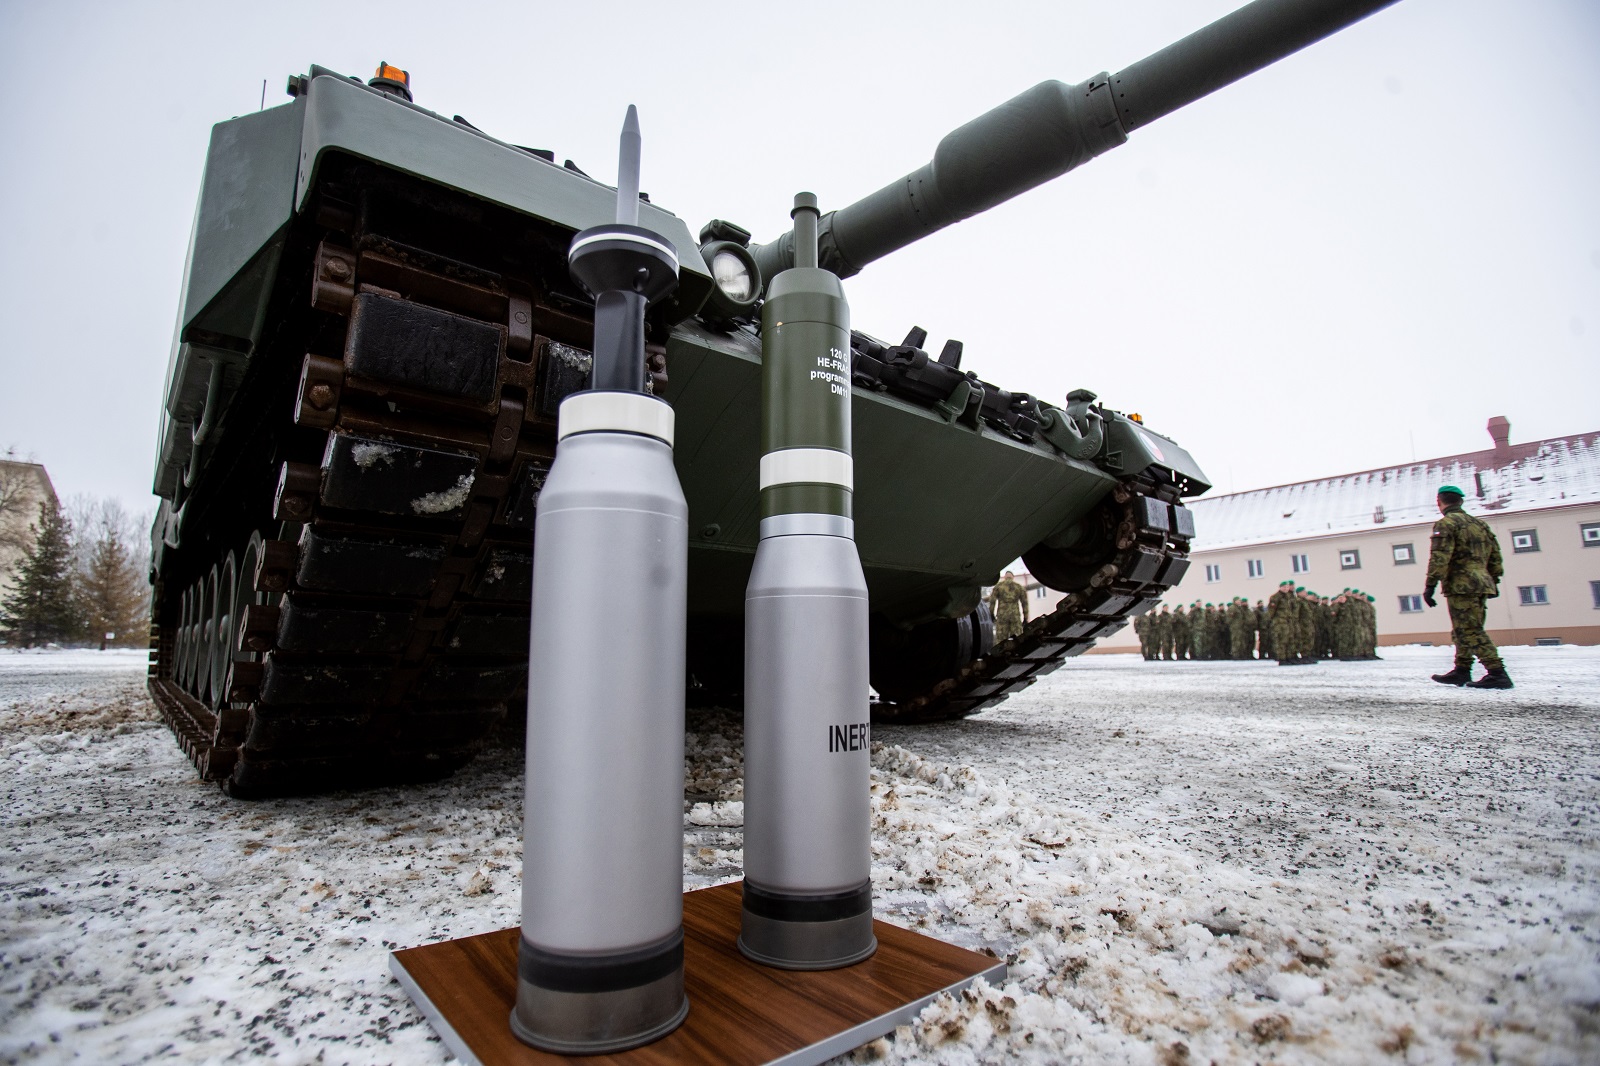 epa10375564 Ammunition standing in front of a Leopard 2A4 tank during a ceremony for the hand over of the symbolic key of the tank to the Czech army, in Praslavice, Czech Republic, 21 December 2022. The Czech Republic is to receive a total of 14 Leopard 2A4 tanks and a Bueffel armored recovery vehicle as a gift from Germany under the German government's 'Ringtausch' programme in return for deliveries of older tanks from Czech army depots to Ukraine. In addition to the tanks, the delivery will include an initial package of spare parts, ammunition and a three-year service support from the supplier, which includes training of Czech soldiers. The value of the donation exceeds 3.85 billion Czech crown (159 million euro). The rest of the military equipment is expected to be delivered to the Czech Republic next year.  EPA/VLADIMIR PRYCEK